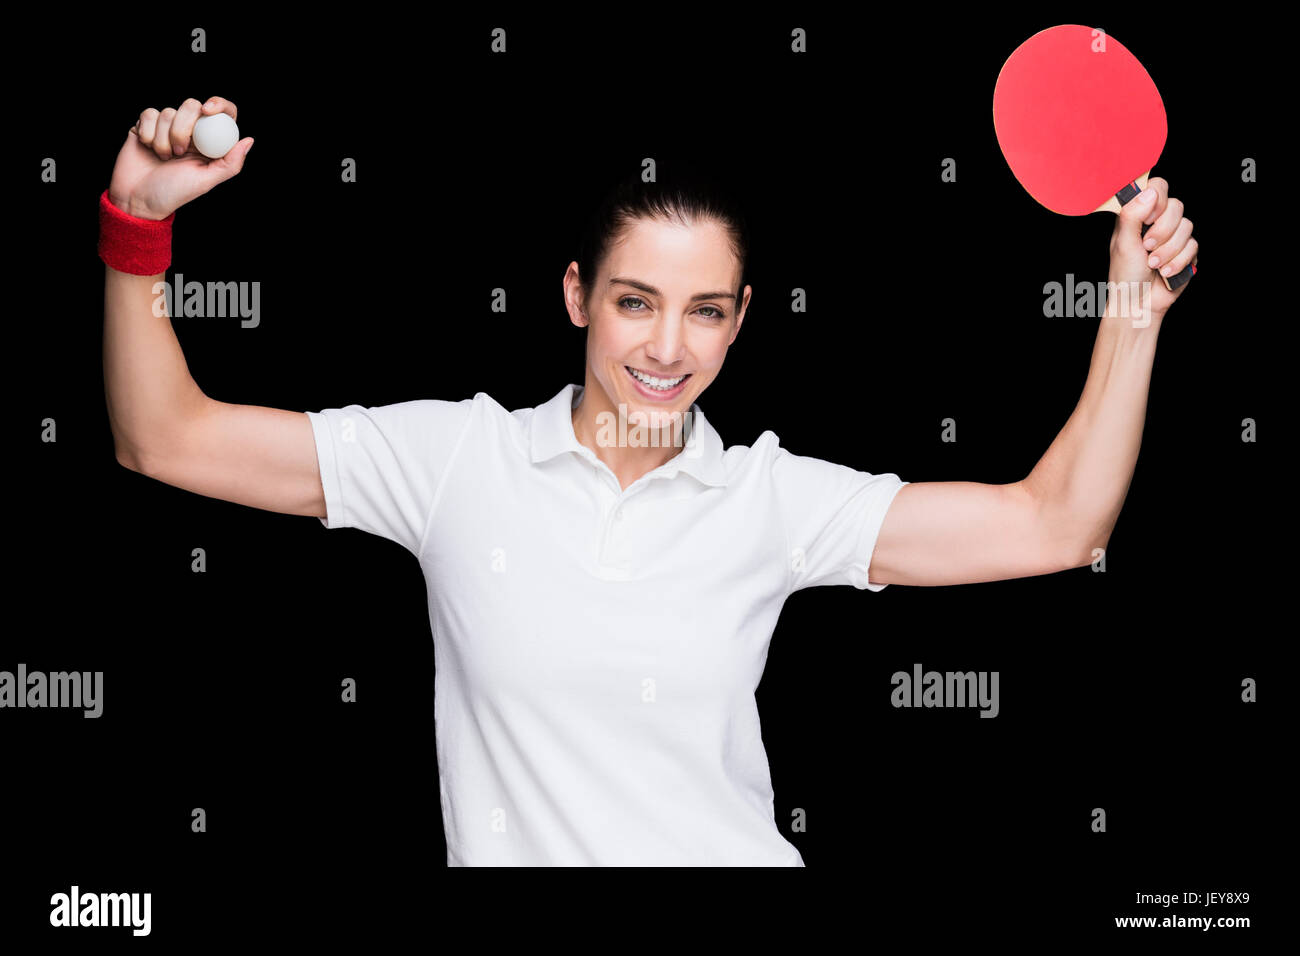 Female athlete playing ping pong Stock Photo